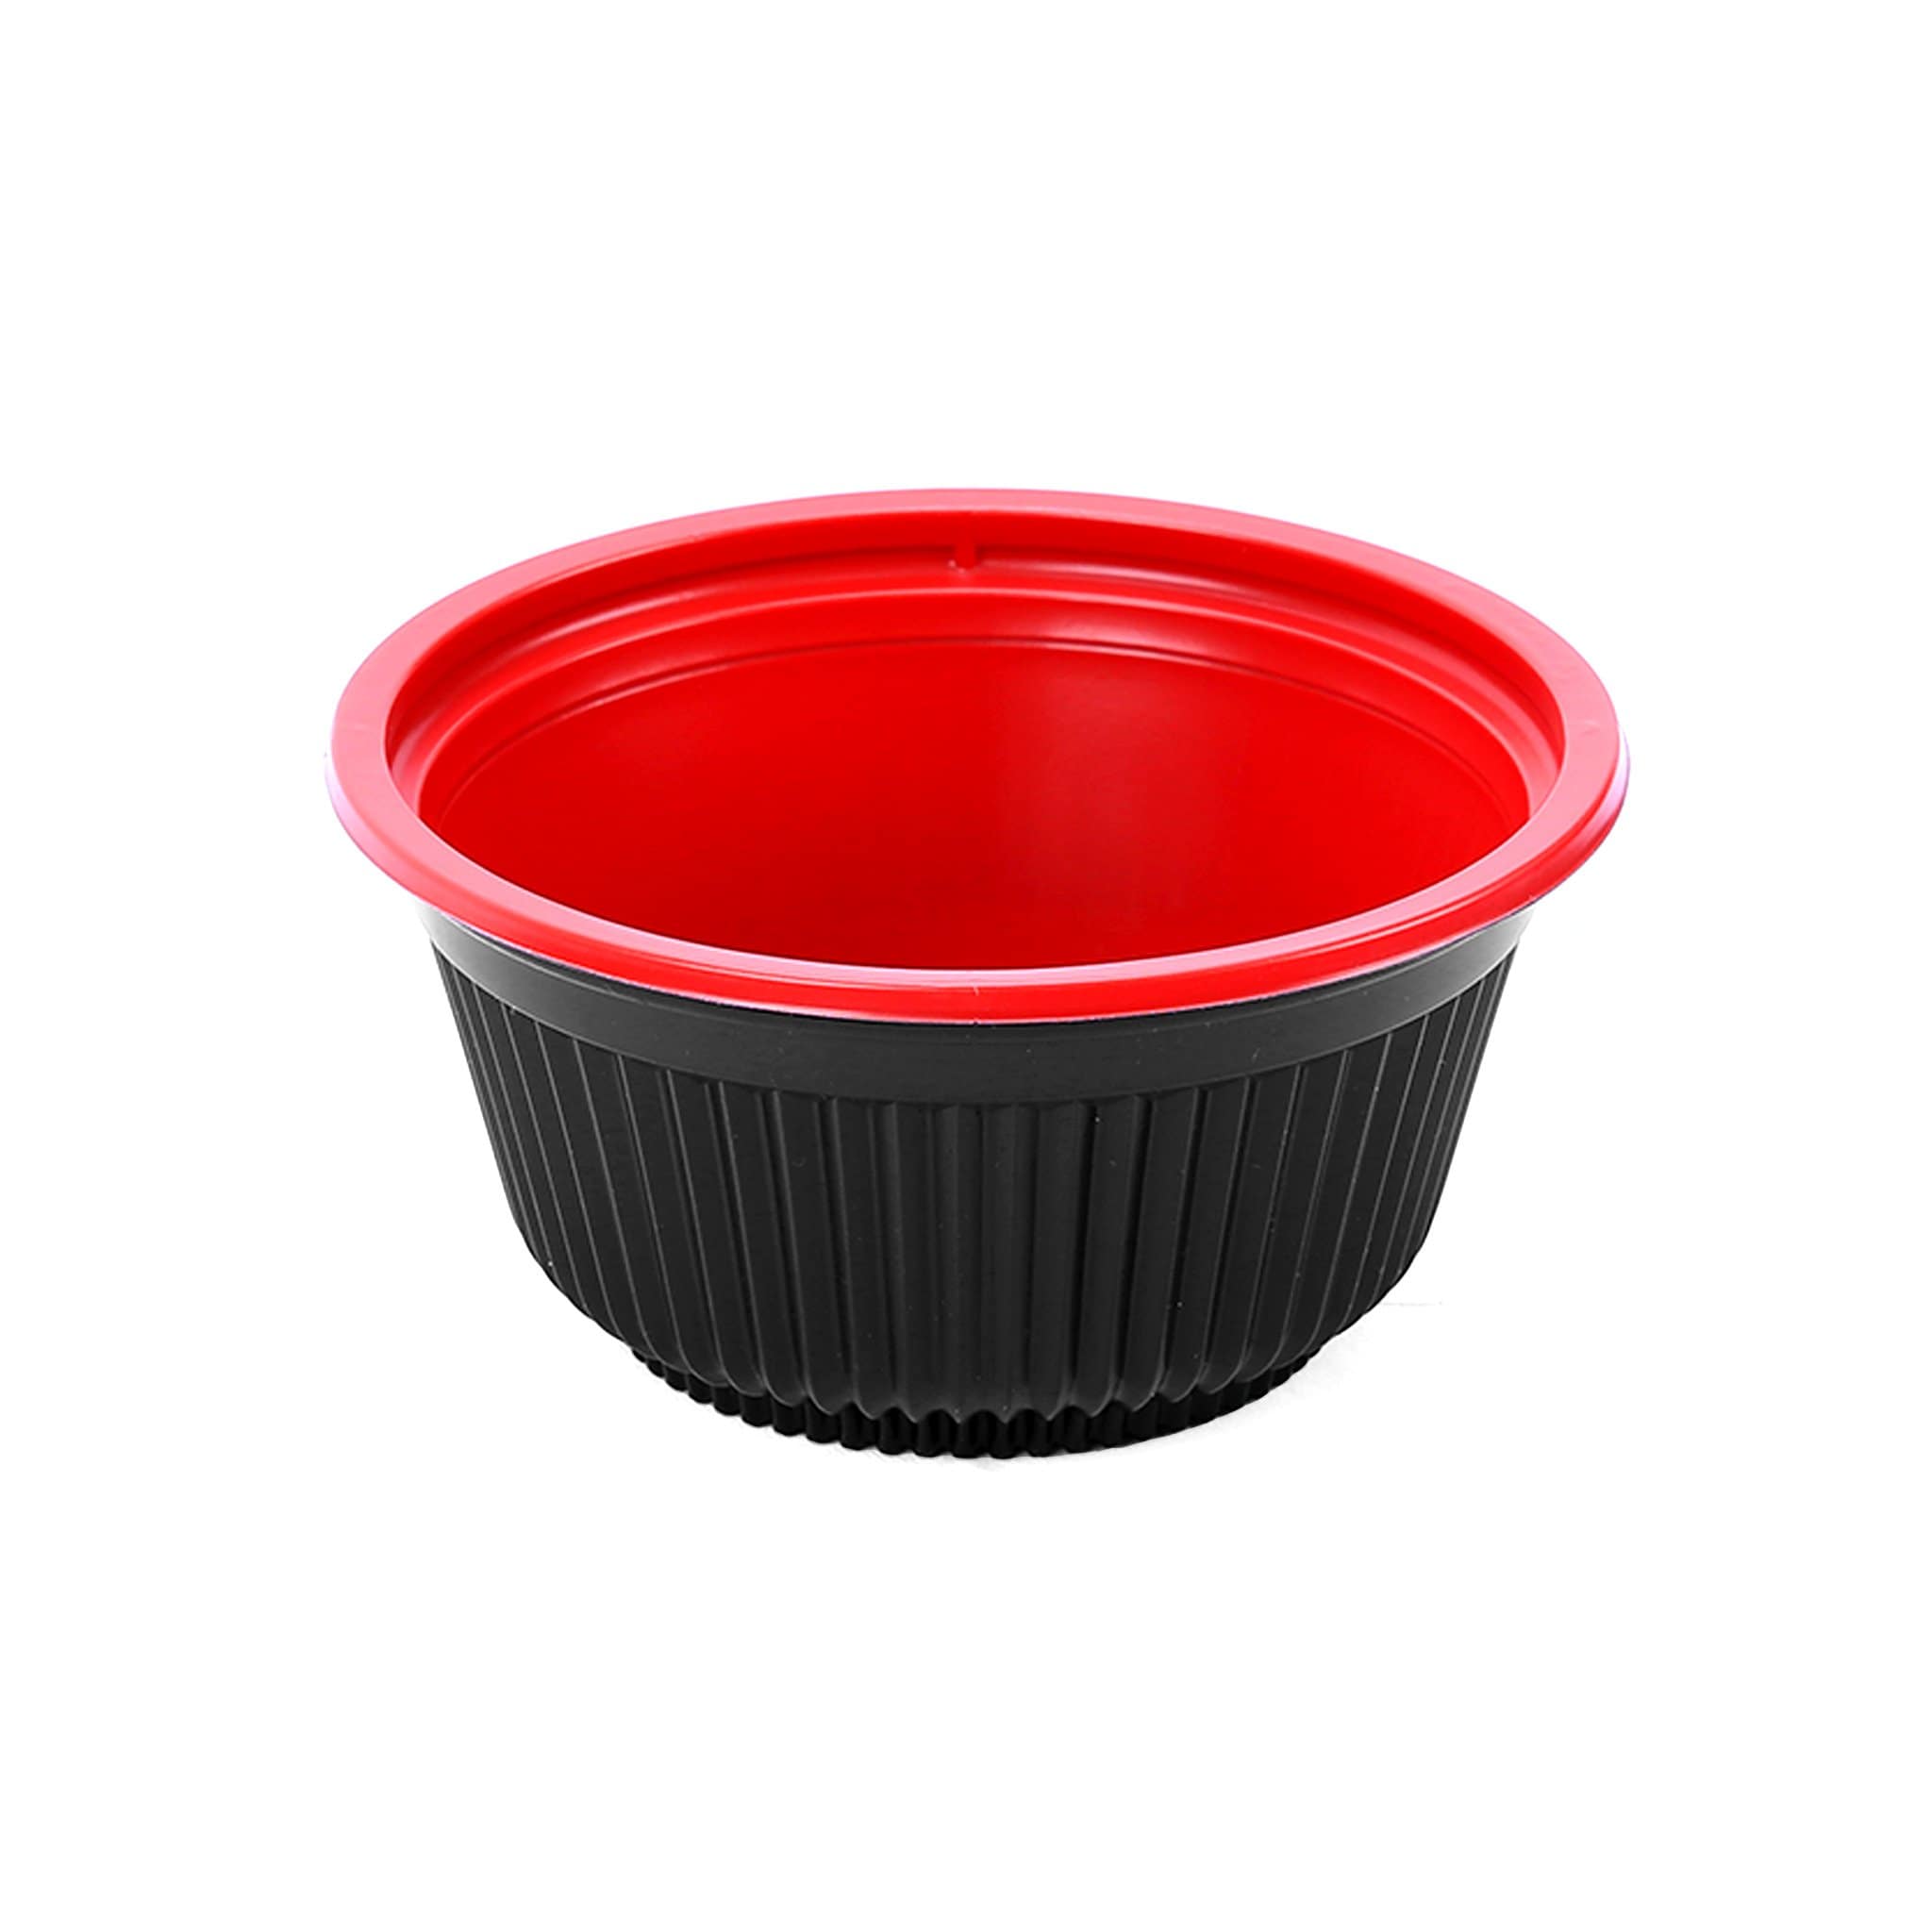 Hotpack | Red & Black Soup Bowl 550 cc with Lids | 200 Pieces - Hotpack Global